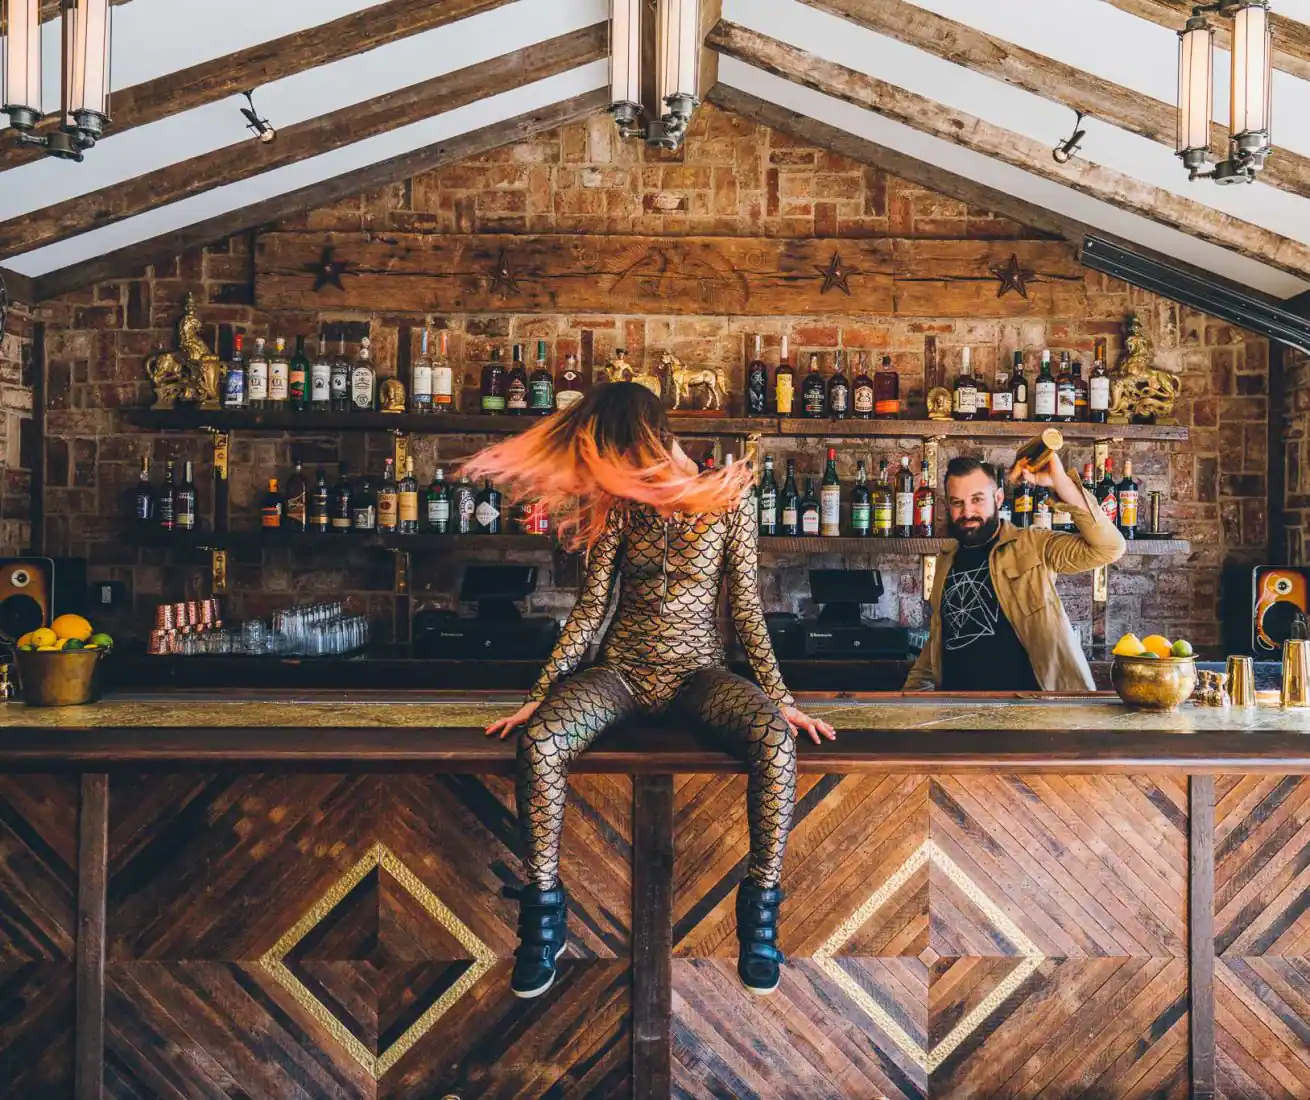 Orange haired dancer whipping her hair while seated on the bar of Public House. Photo by Dave Krugman.